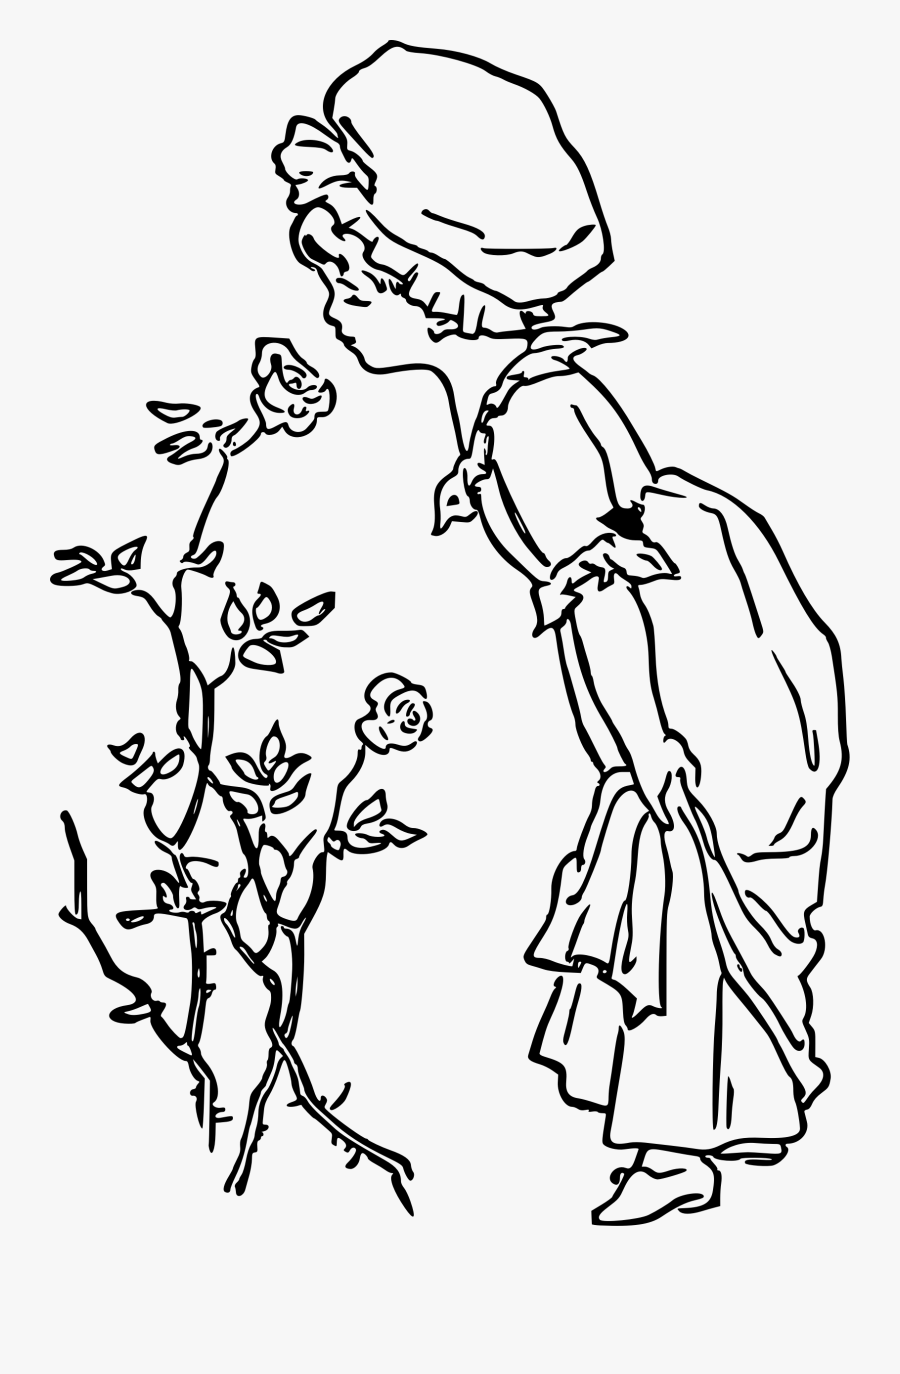 Girl Smelling Flowers - Girl Smelling Flower Drawing, Transparent Clipart